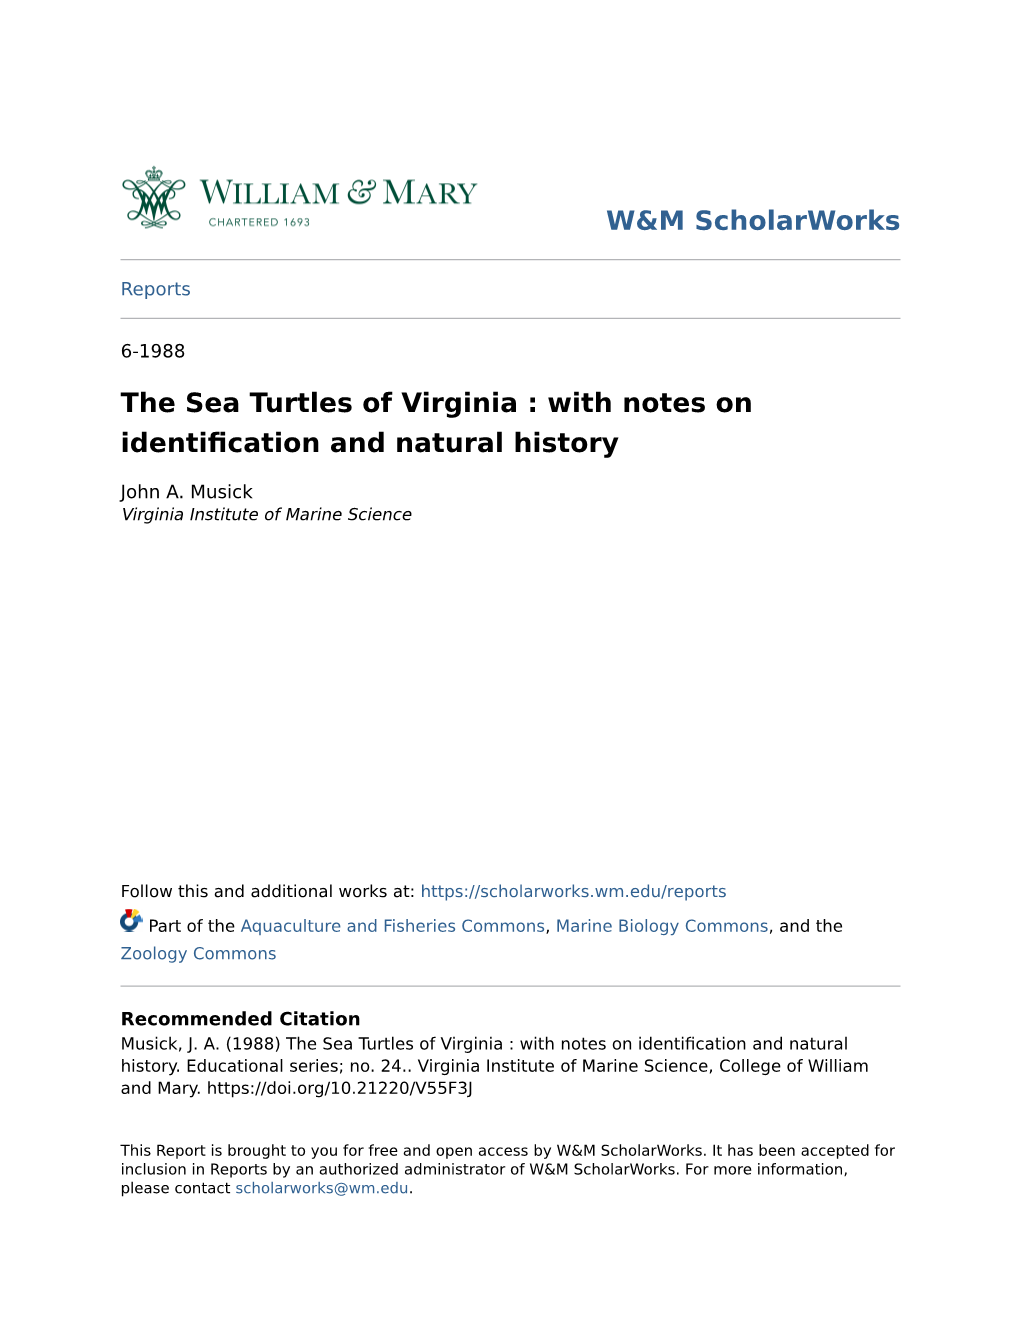 The Sea Turtles of Virginia : with Notes on Identification and Natural History